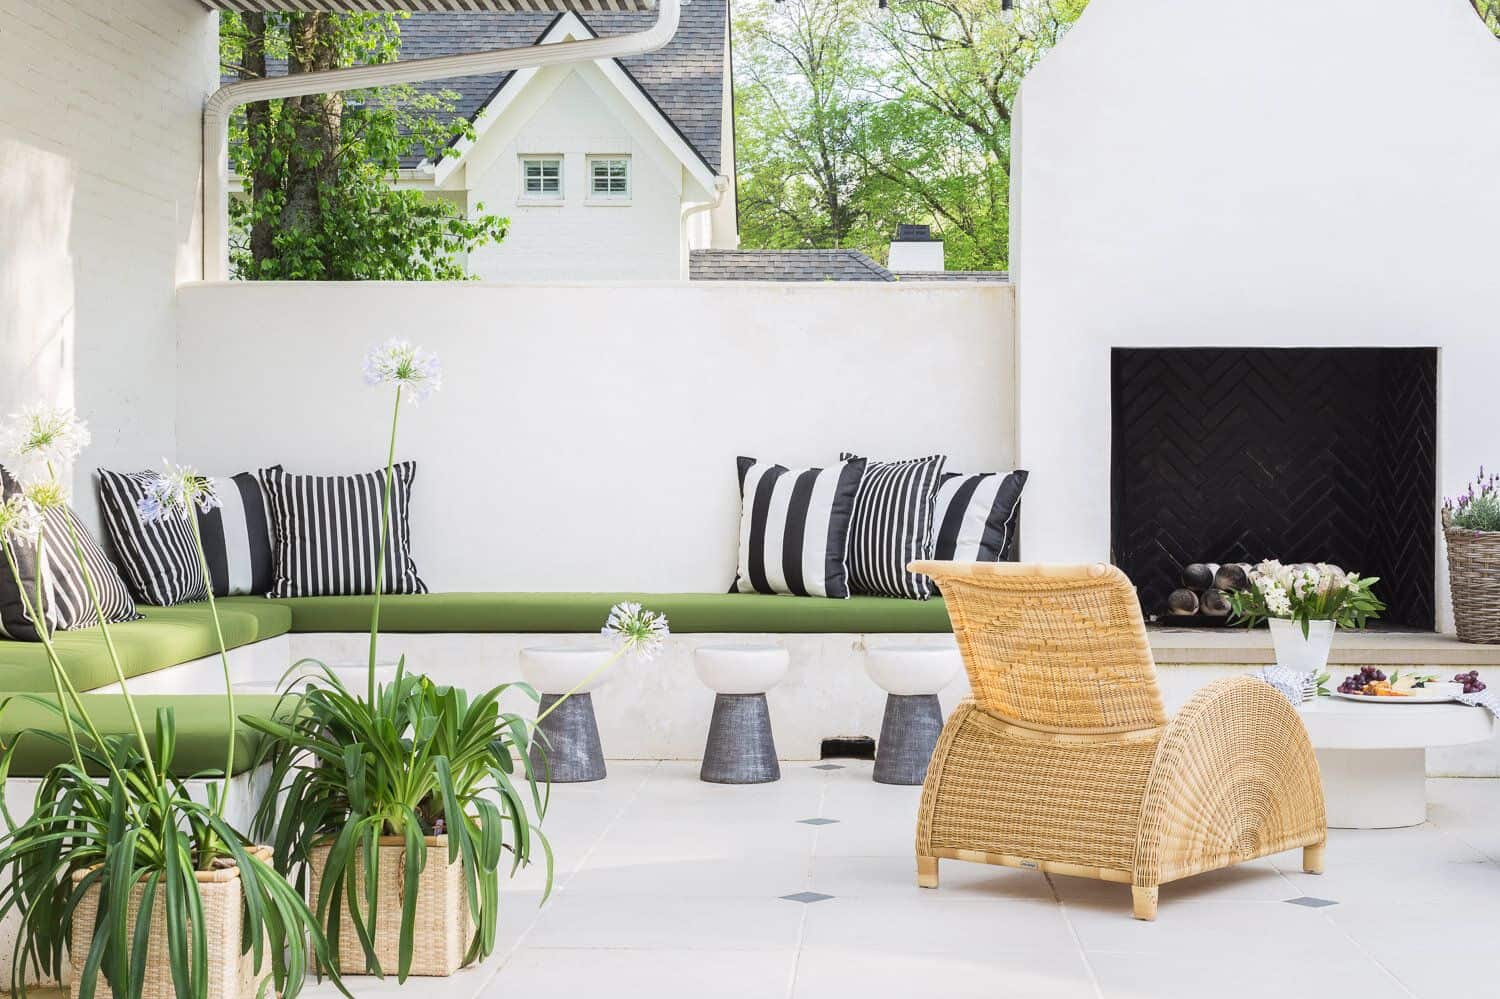 Outdoor seating with plants and chair with wall paint design idea